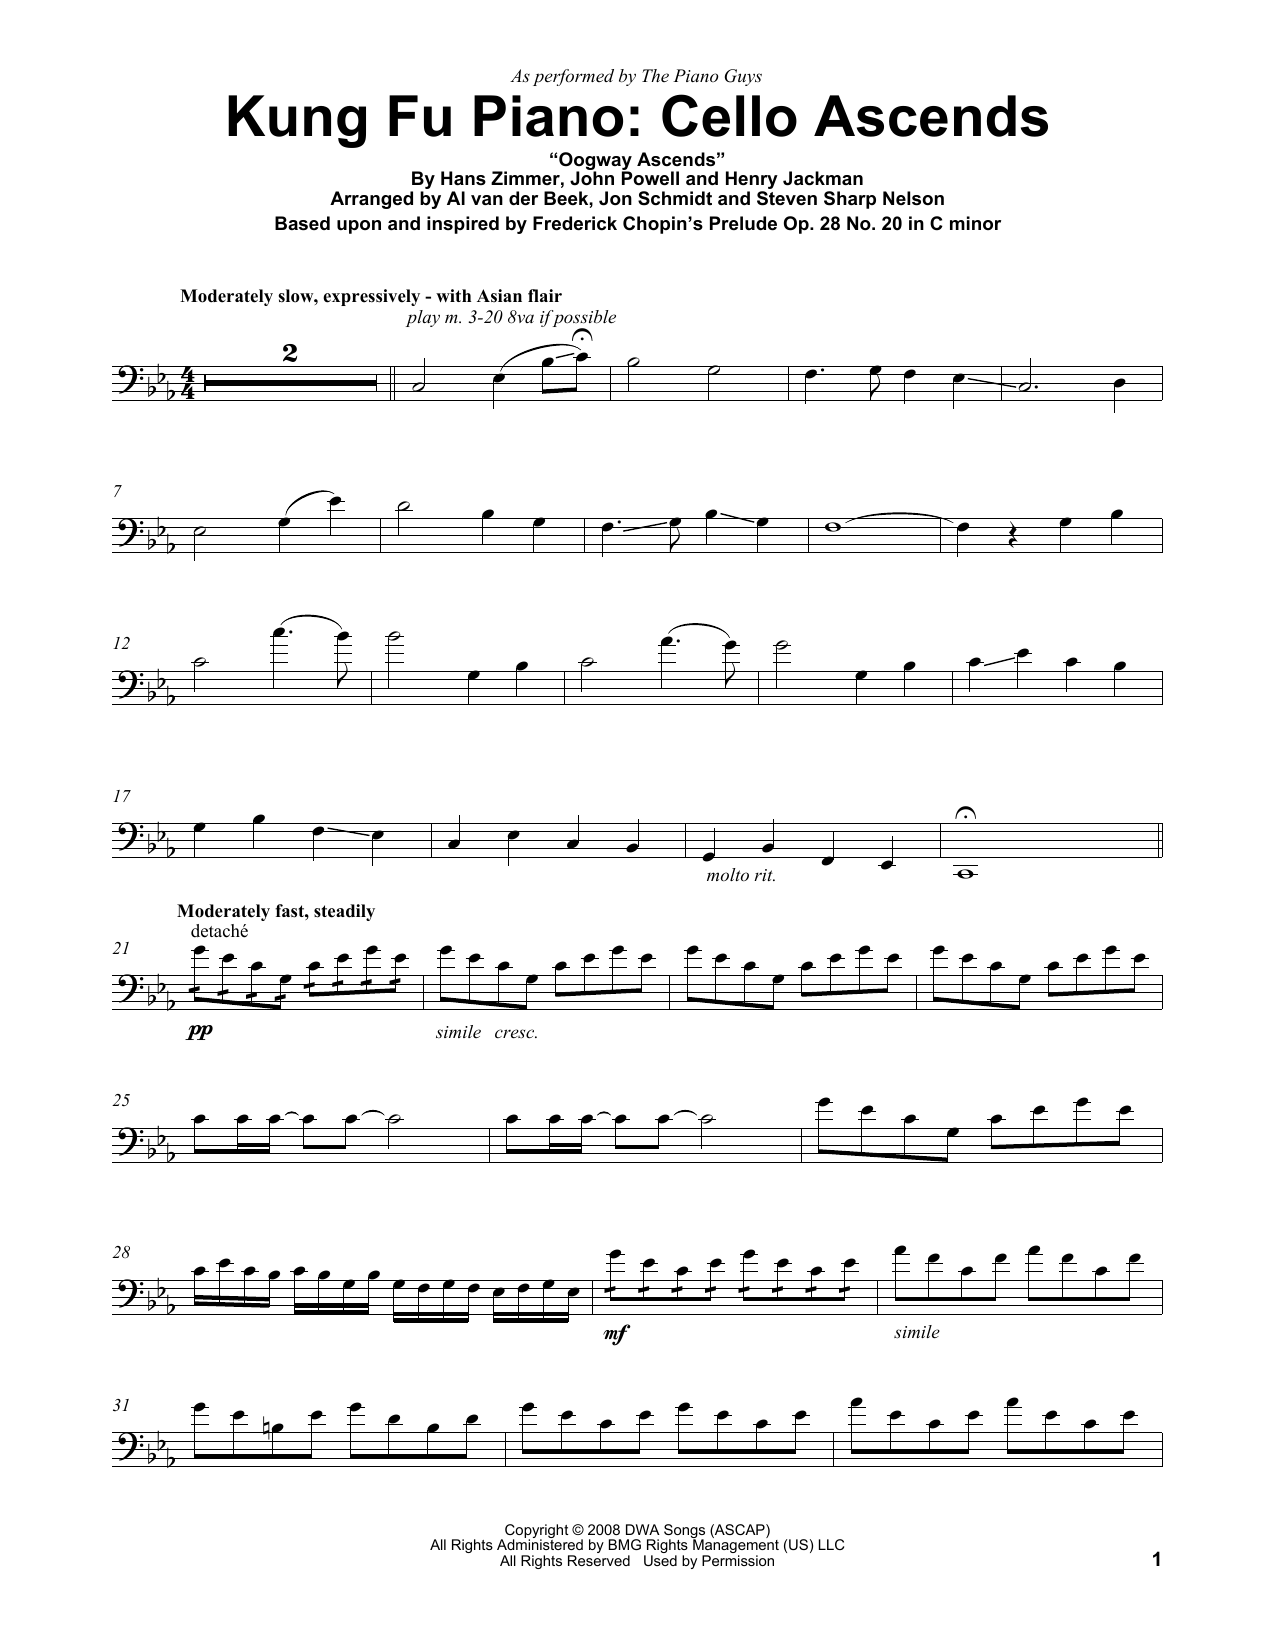 Download The Piano Guys Kung Fu Piano: Cello Ascends Sheet Music